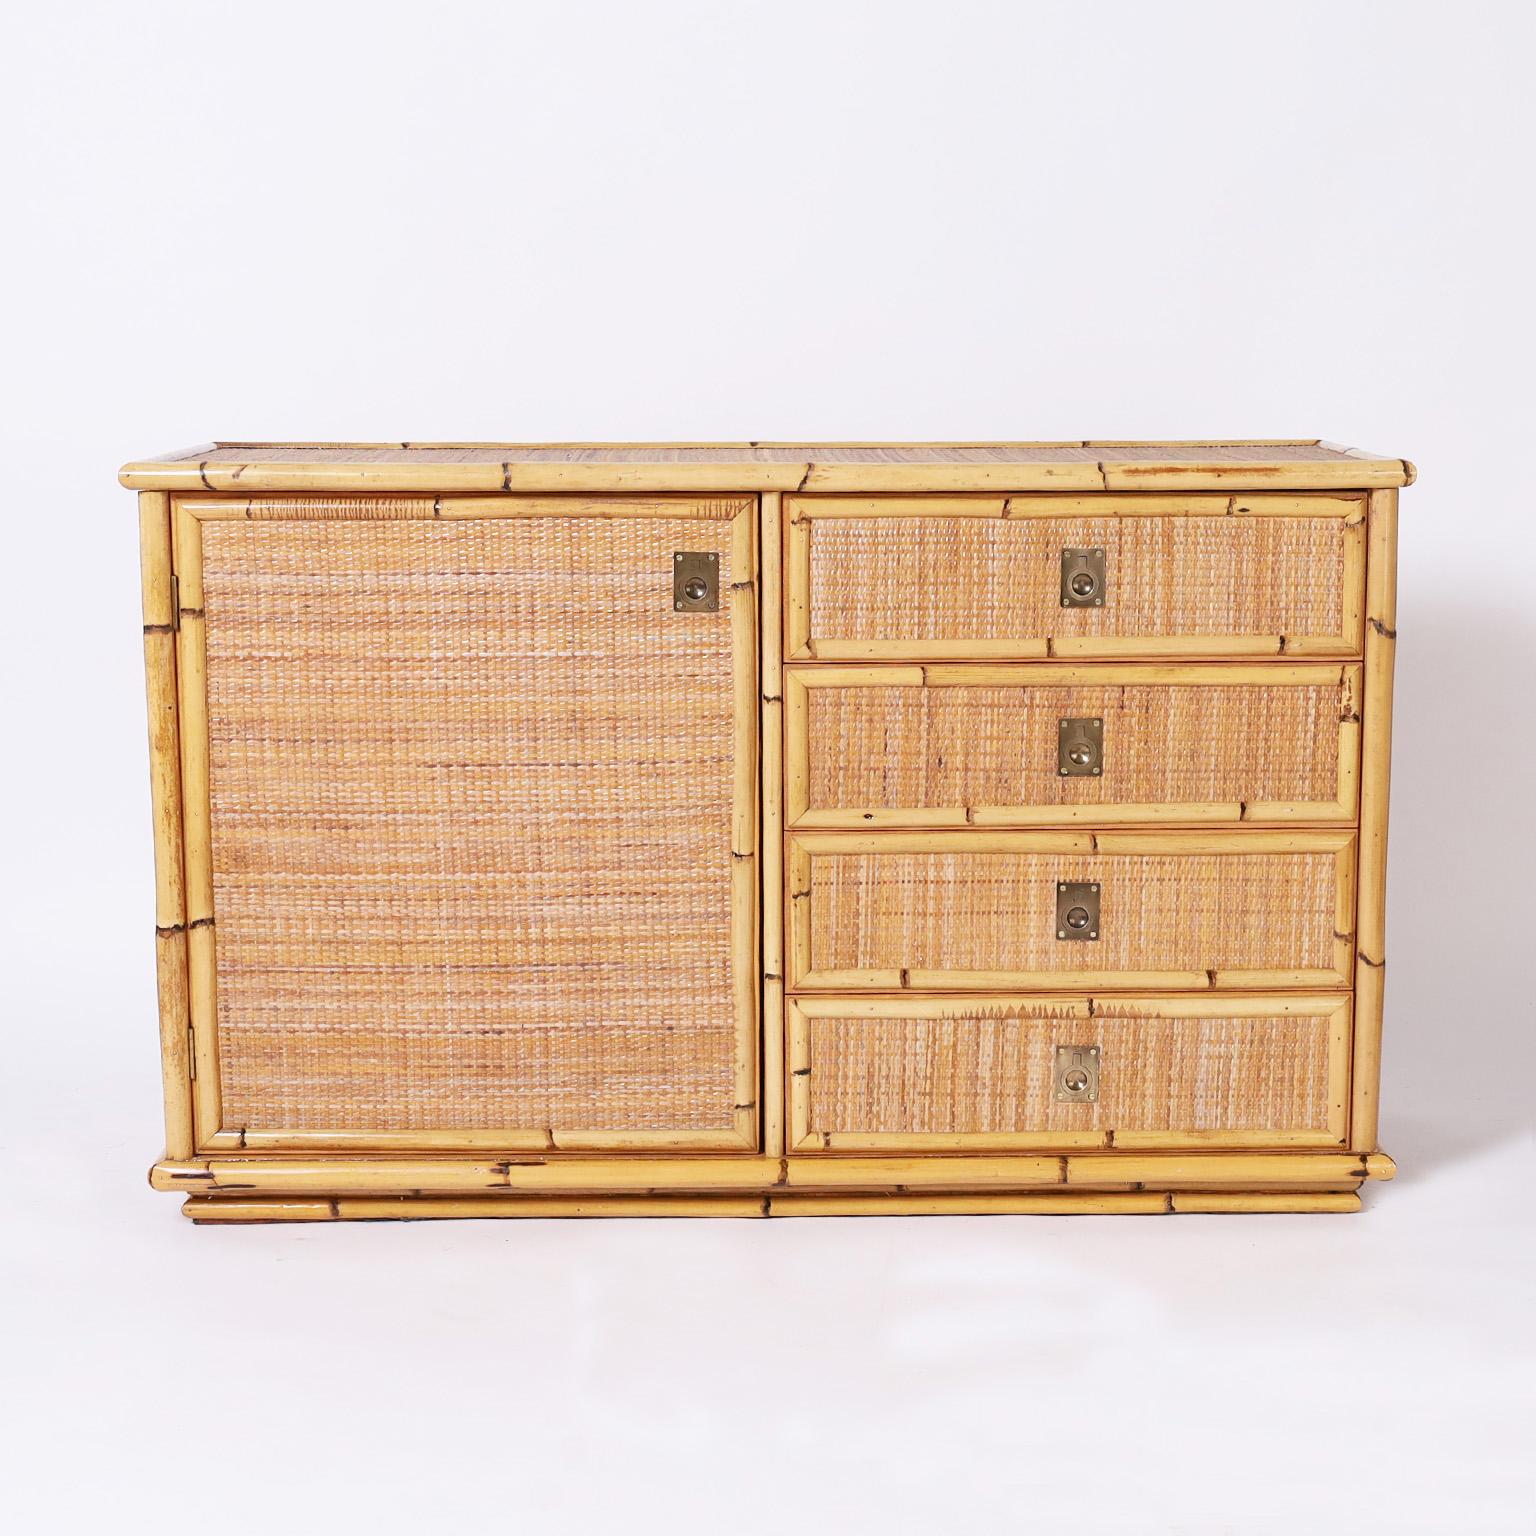 Mid century cabinet or chest with a bamboo frame, grasscloth panels all around, campaign style brass hardware, a cabinet door and four drawers. Signed Dalvera on the door. 